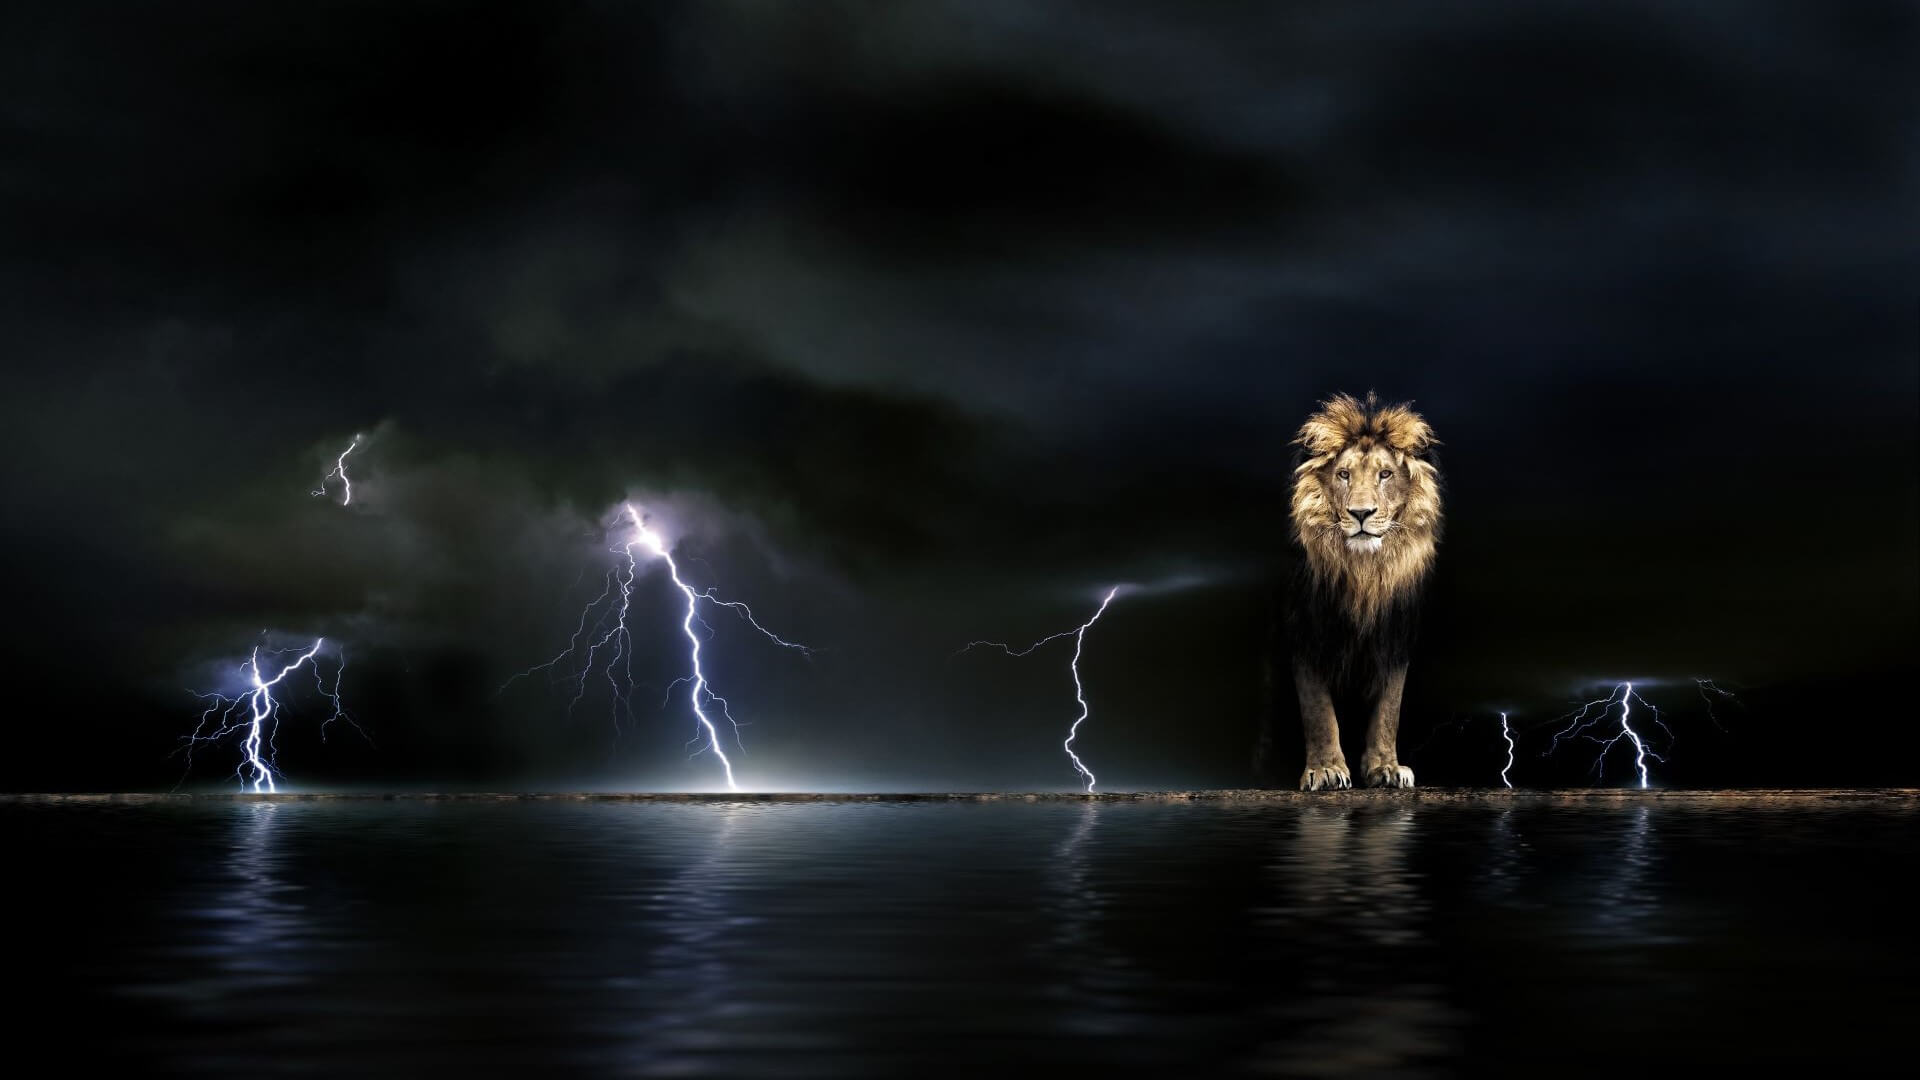 Lion against black sky with lightning bolts